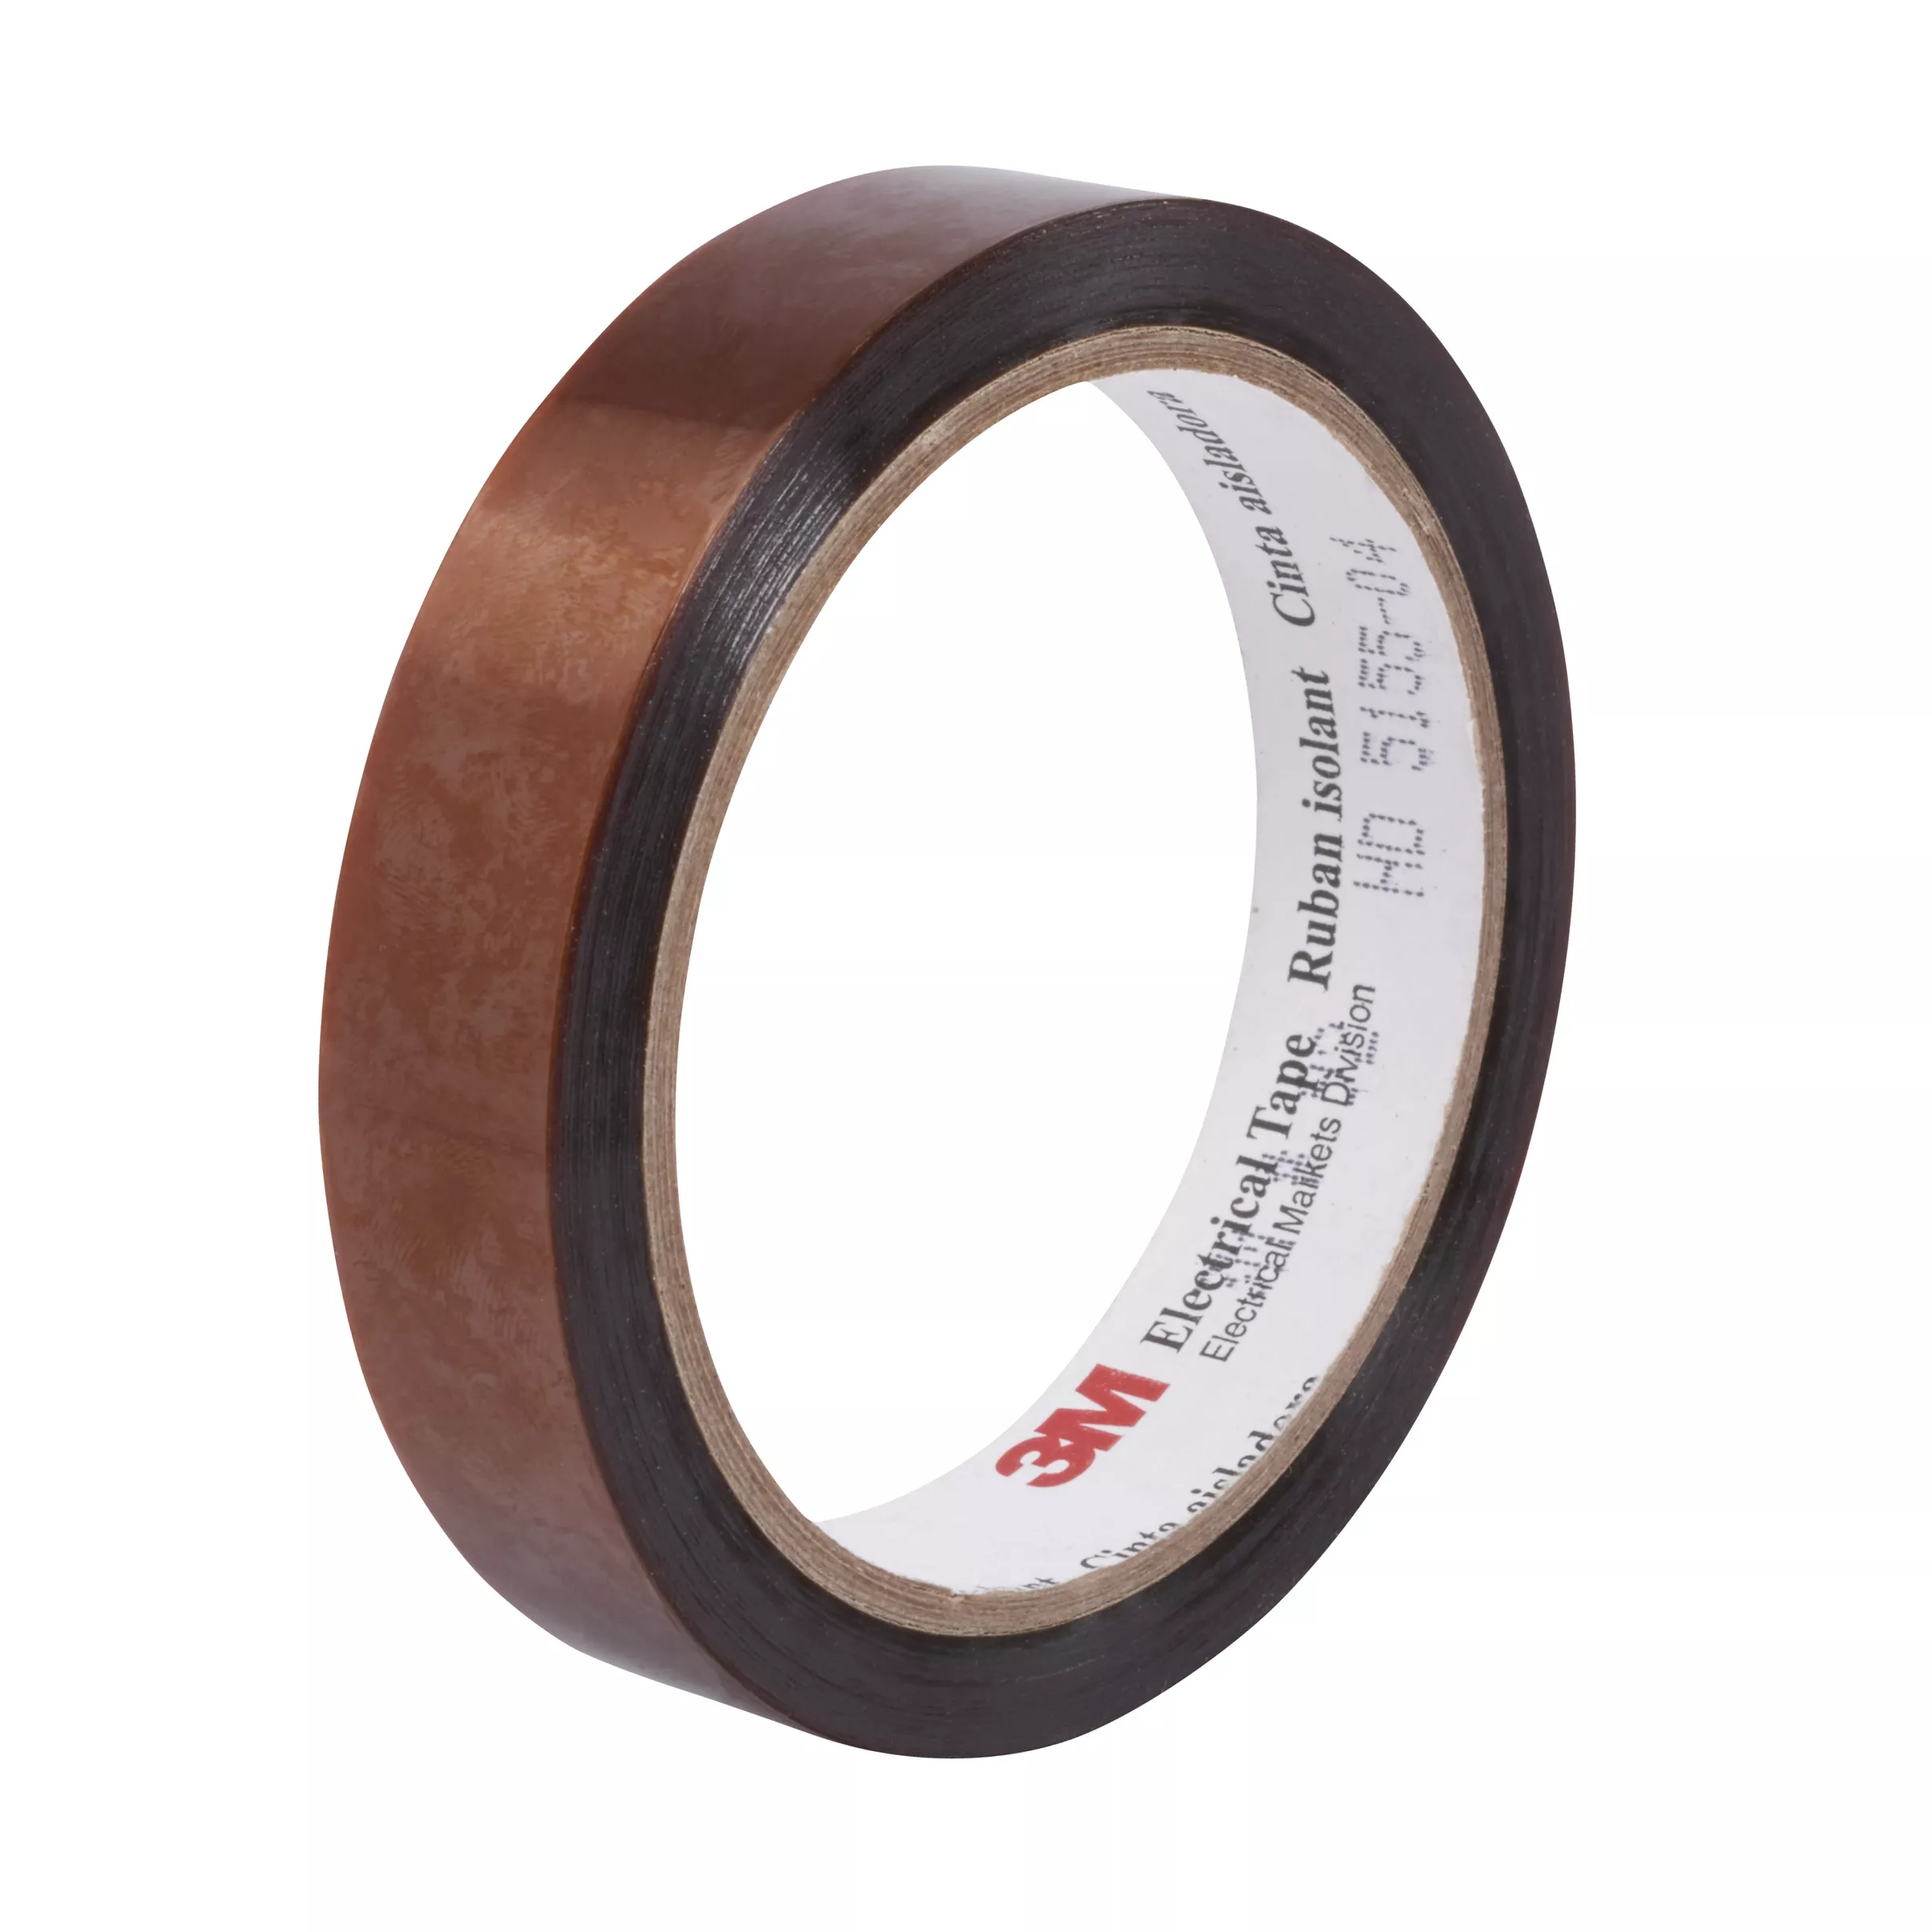 SKU 7010348245 | 3M™ Polyimide Film Electrical Tape 92